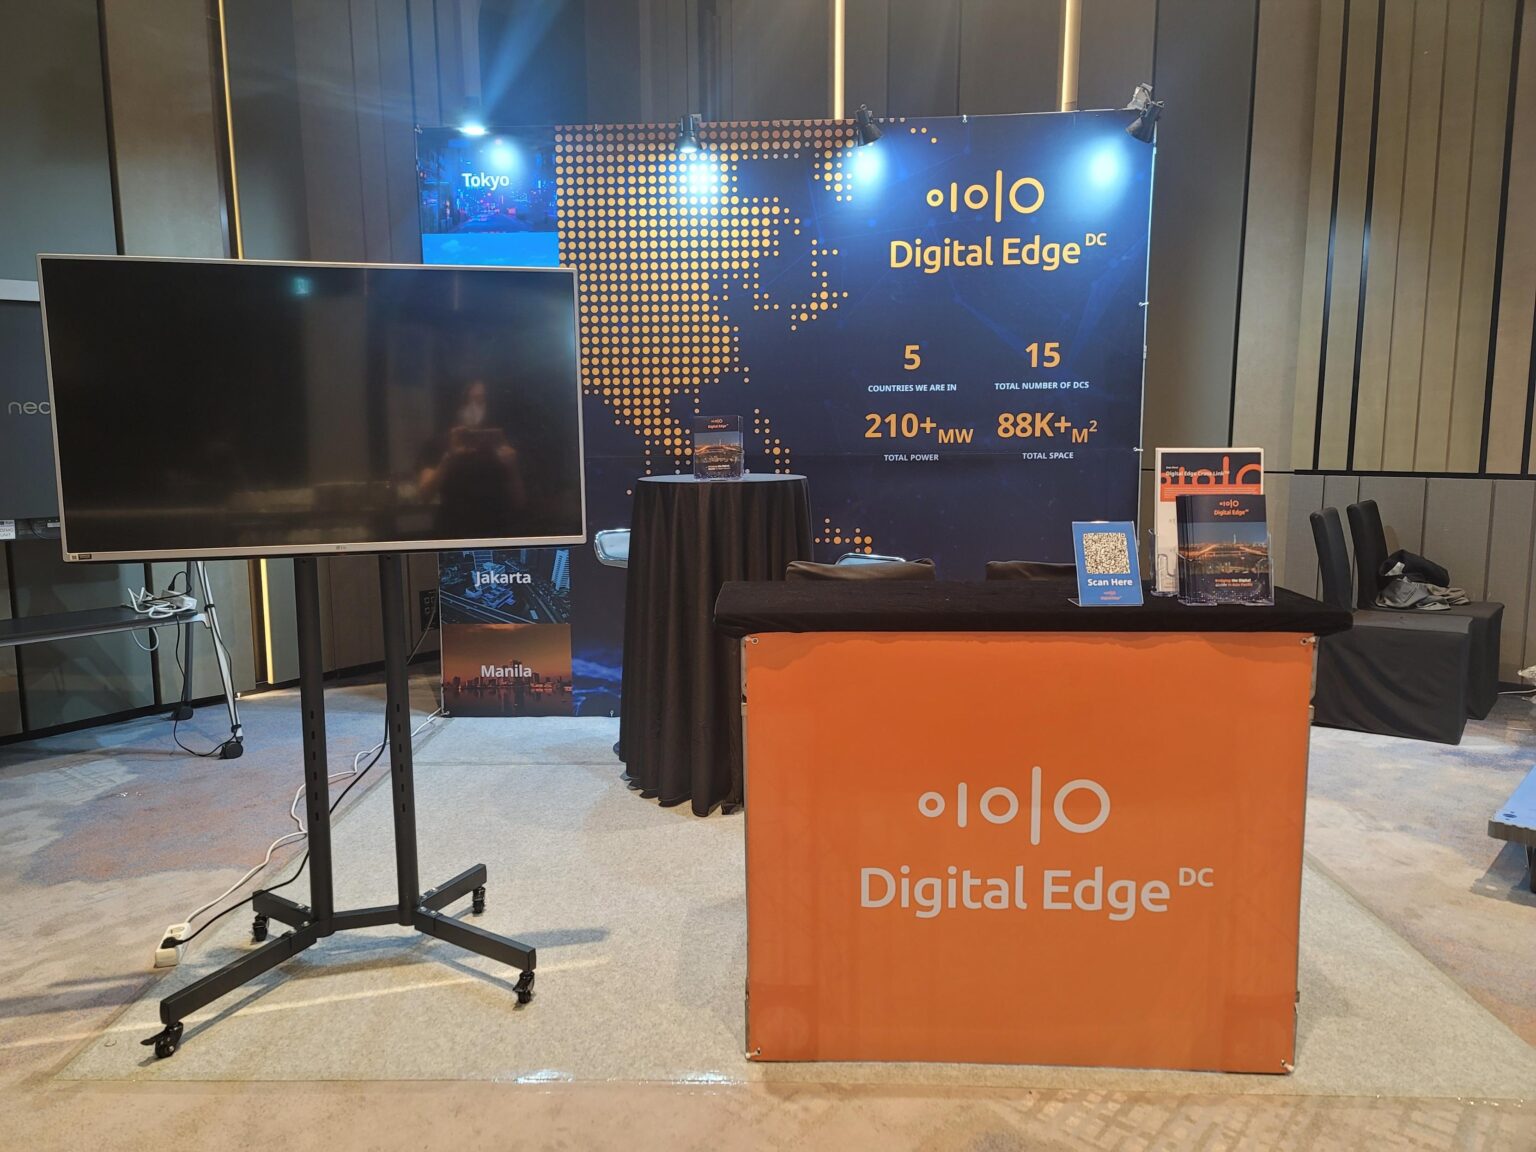 The Digital Edge team connected with customers, vendors and partners during the event at our booth, including showcasing their new 120MW SEL2 data center project